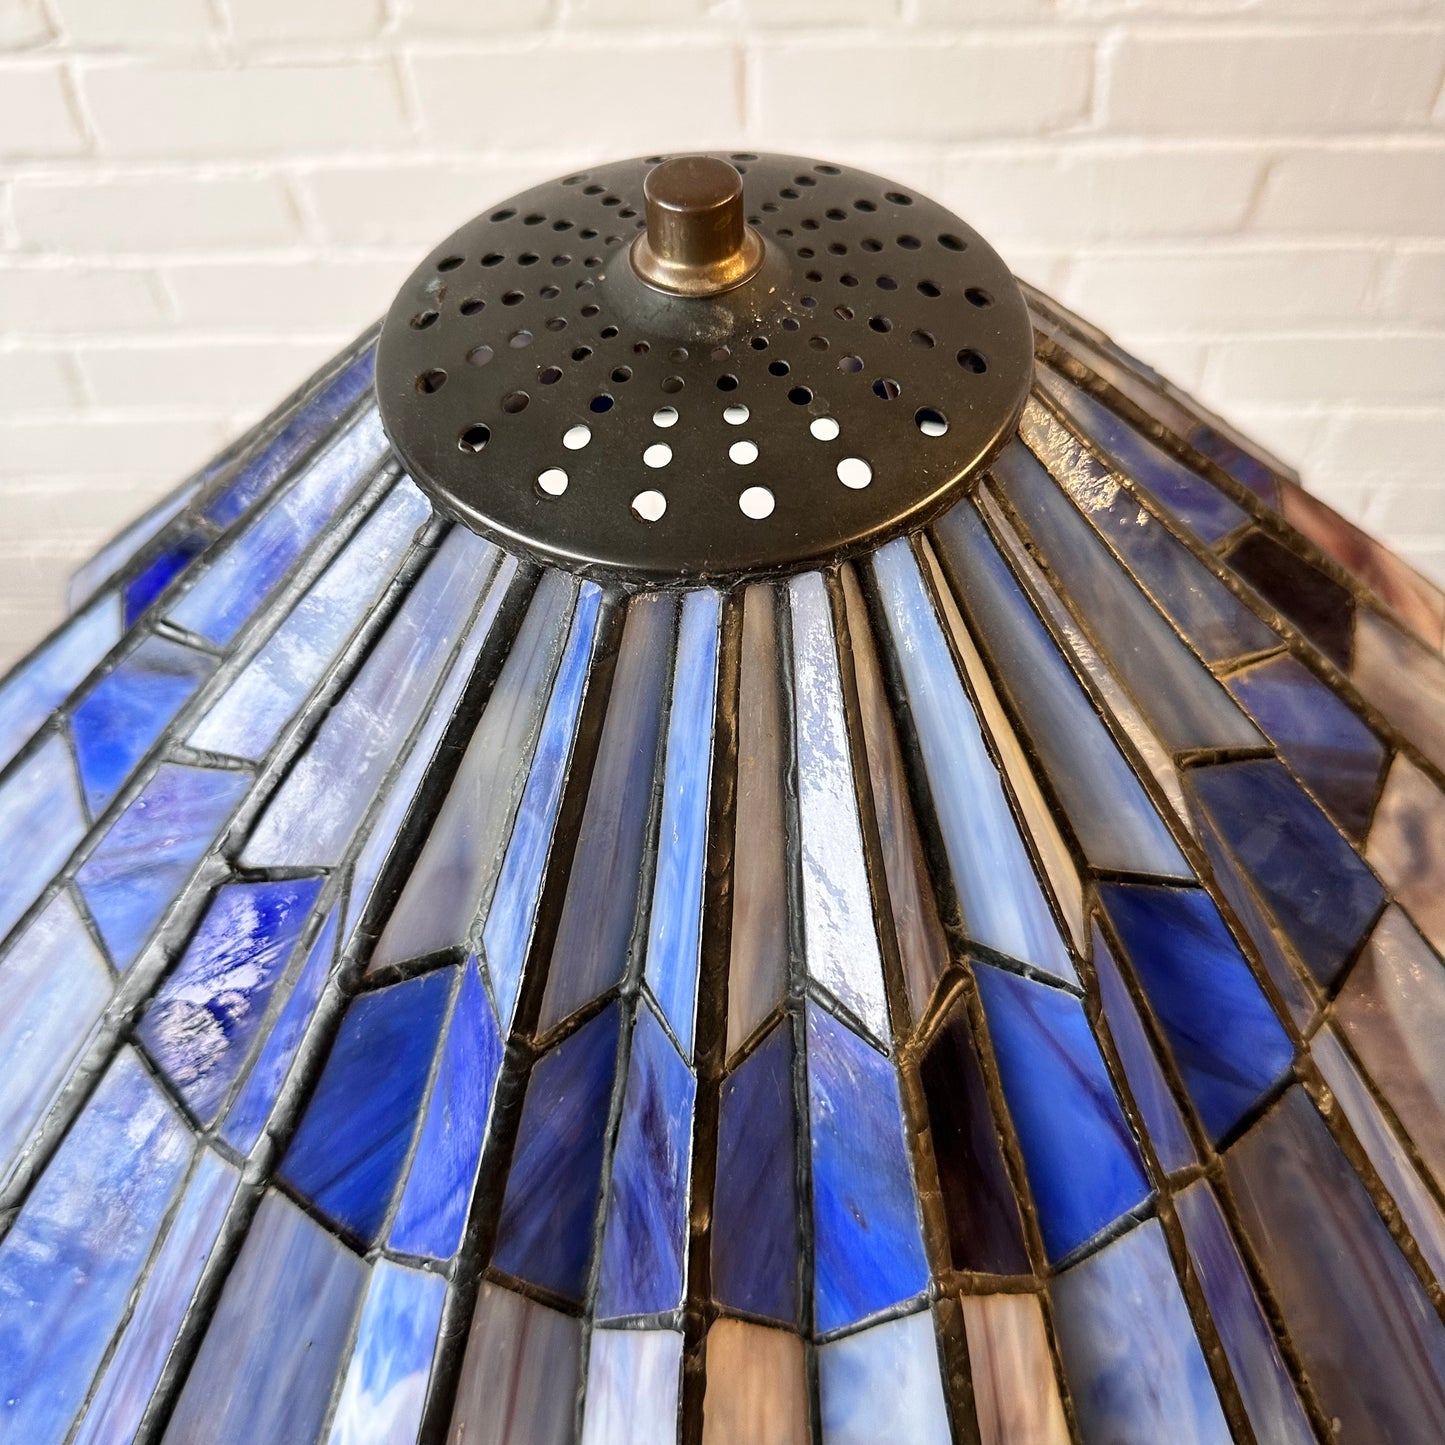 ART DECO BLUE STAINED GLASS ACCORDIAN TABLE LAMP